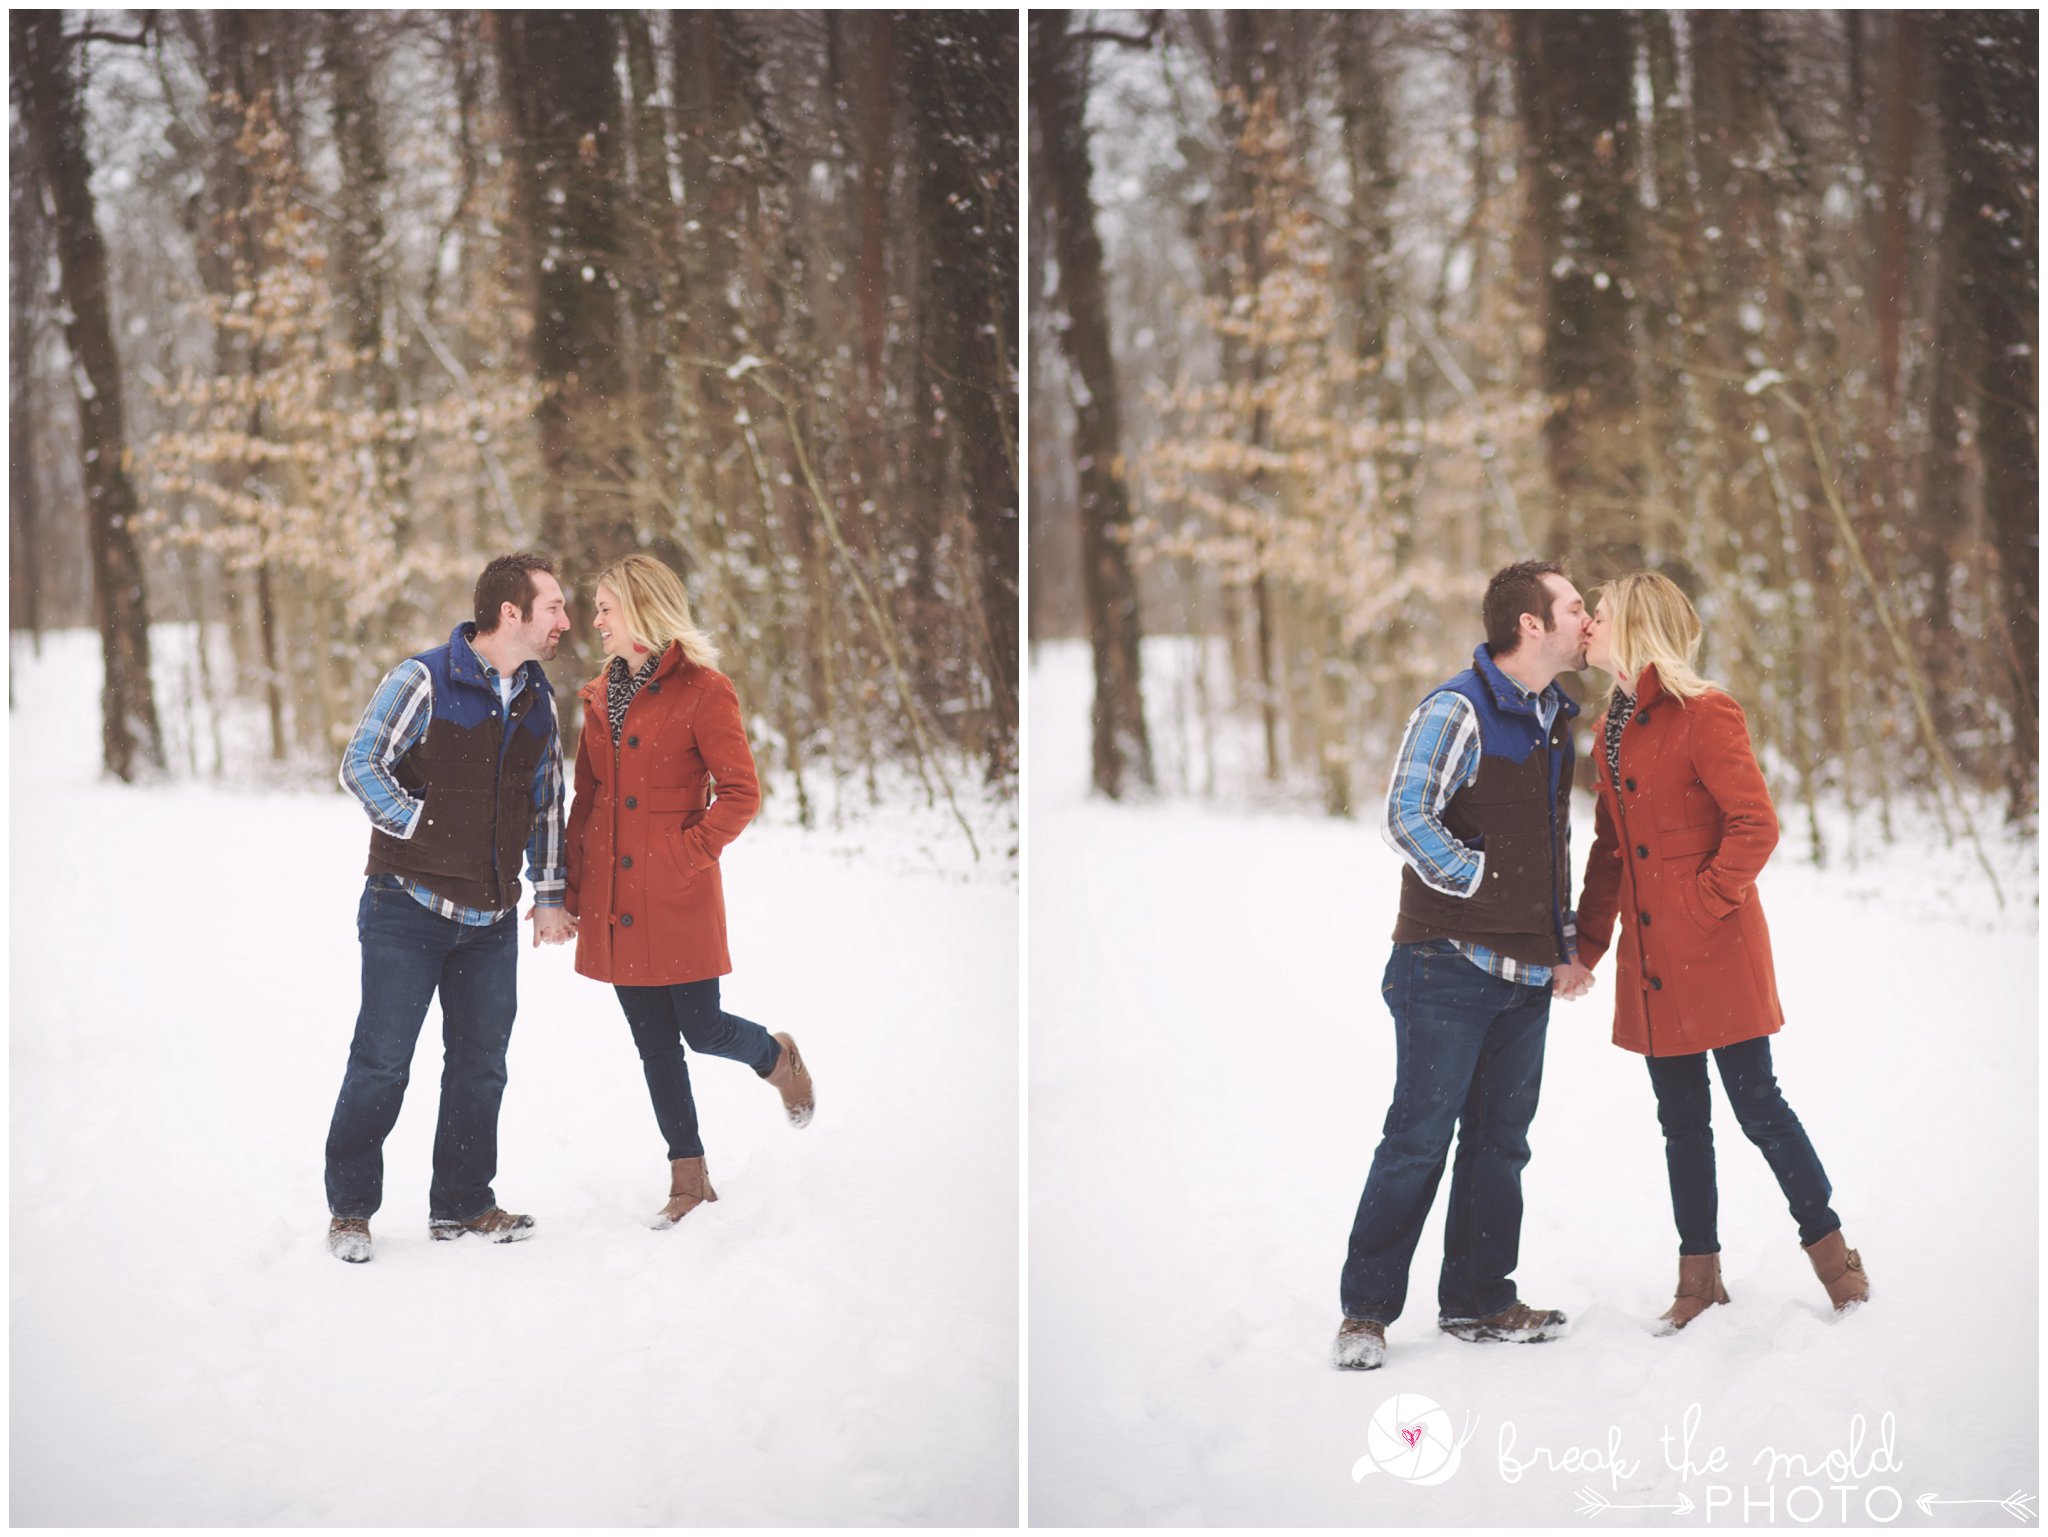 break-the-mold-photo-snowy-day-engagement-photos-knoxville-tn-tennessee-snow-day-pictures-winter-outdoor-unique-family_1494.jpg